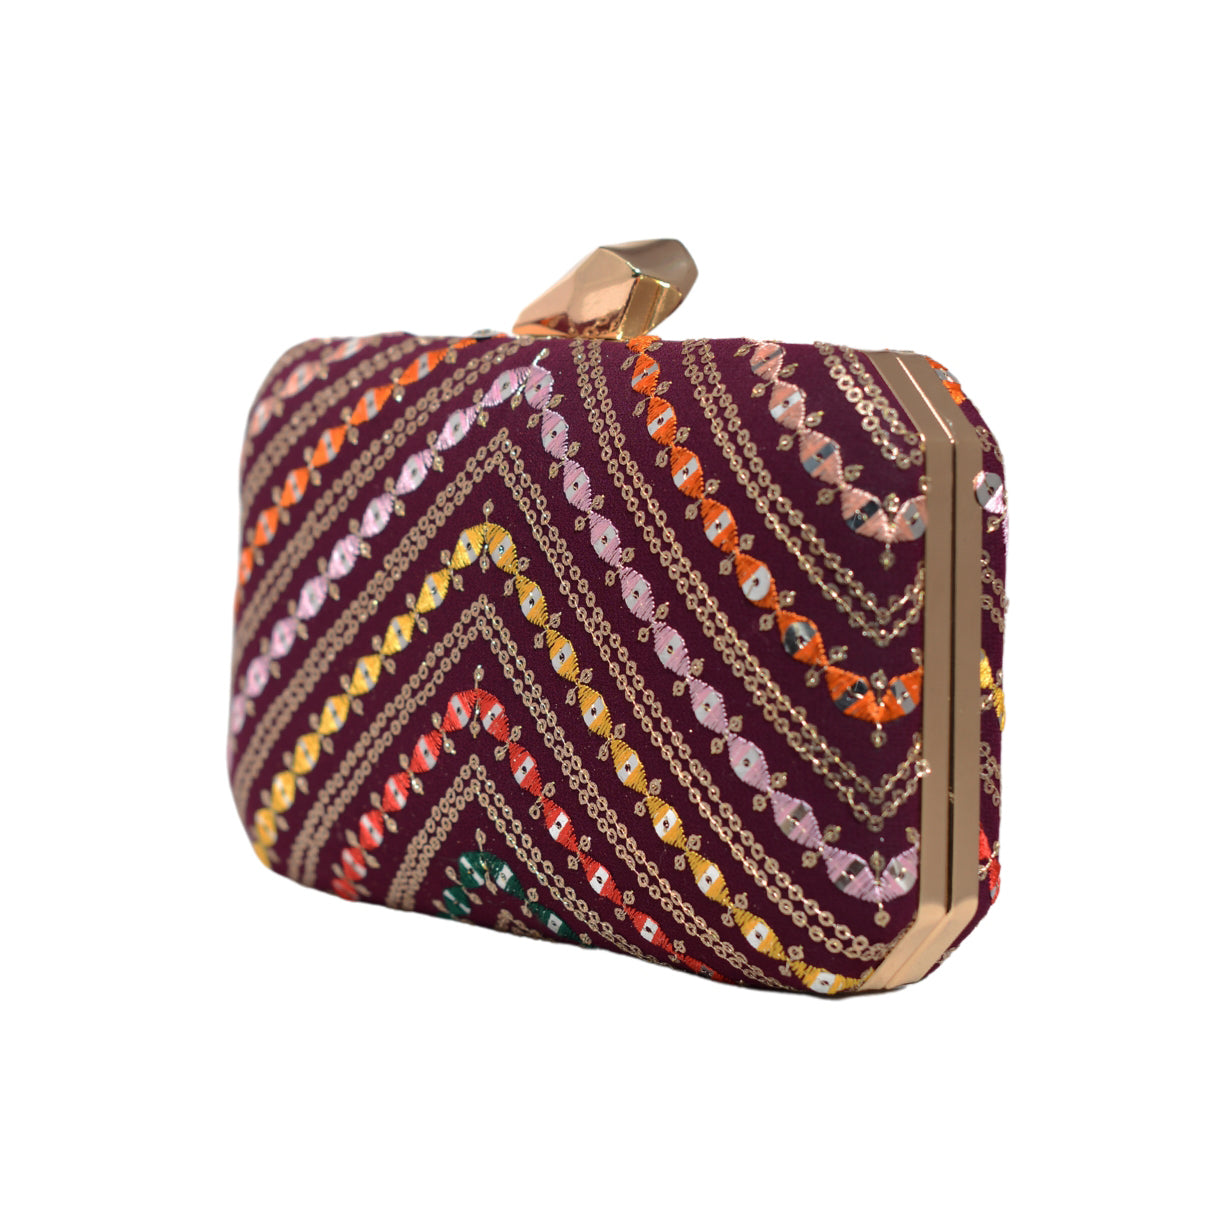 Wine Sequins Multicolour Embroidery Clutch